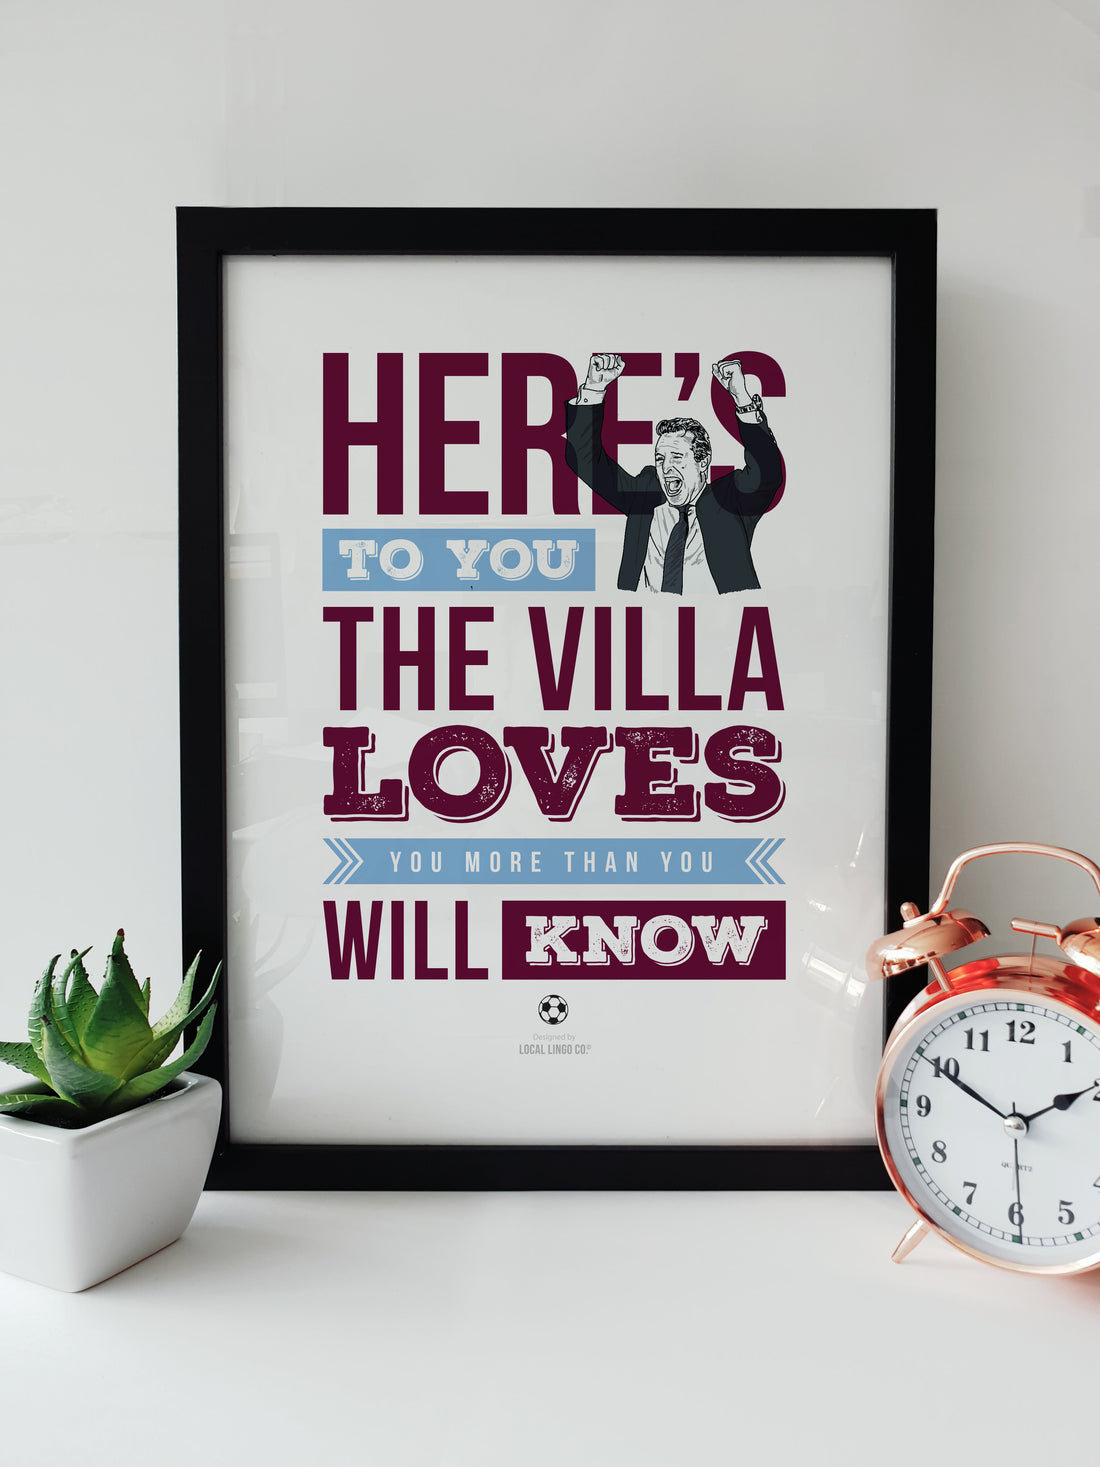 Here's to You, The Villa Loves You - Aston Villa football fan chant print by Local Lingo featuring Unai Emery illustration